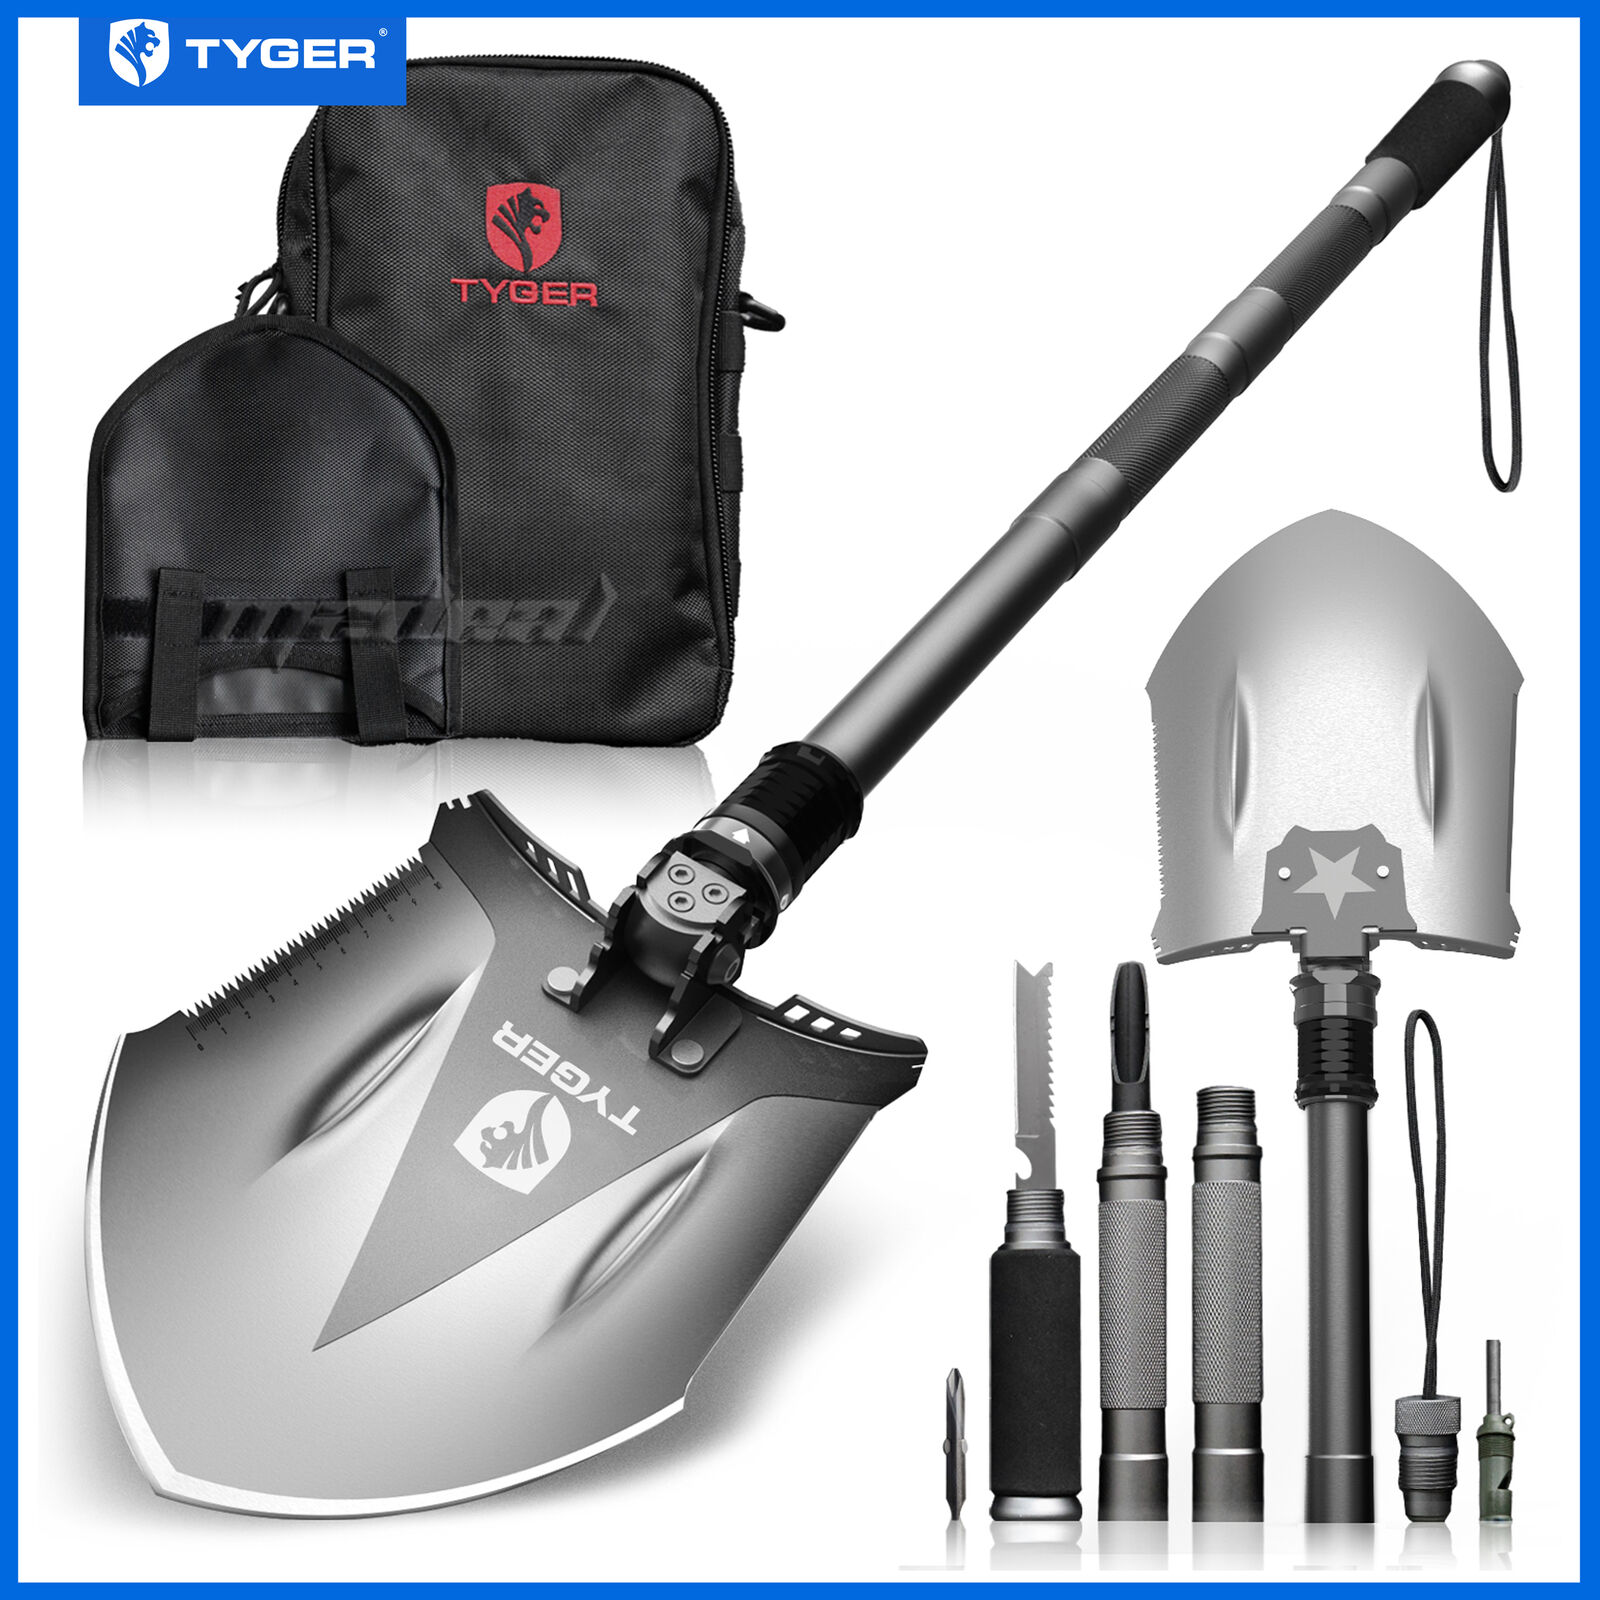 TYGER Shovel Military Heavyduty Folding Compact Tool with 16-In-1 Multifunction